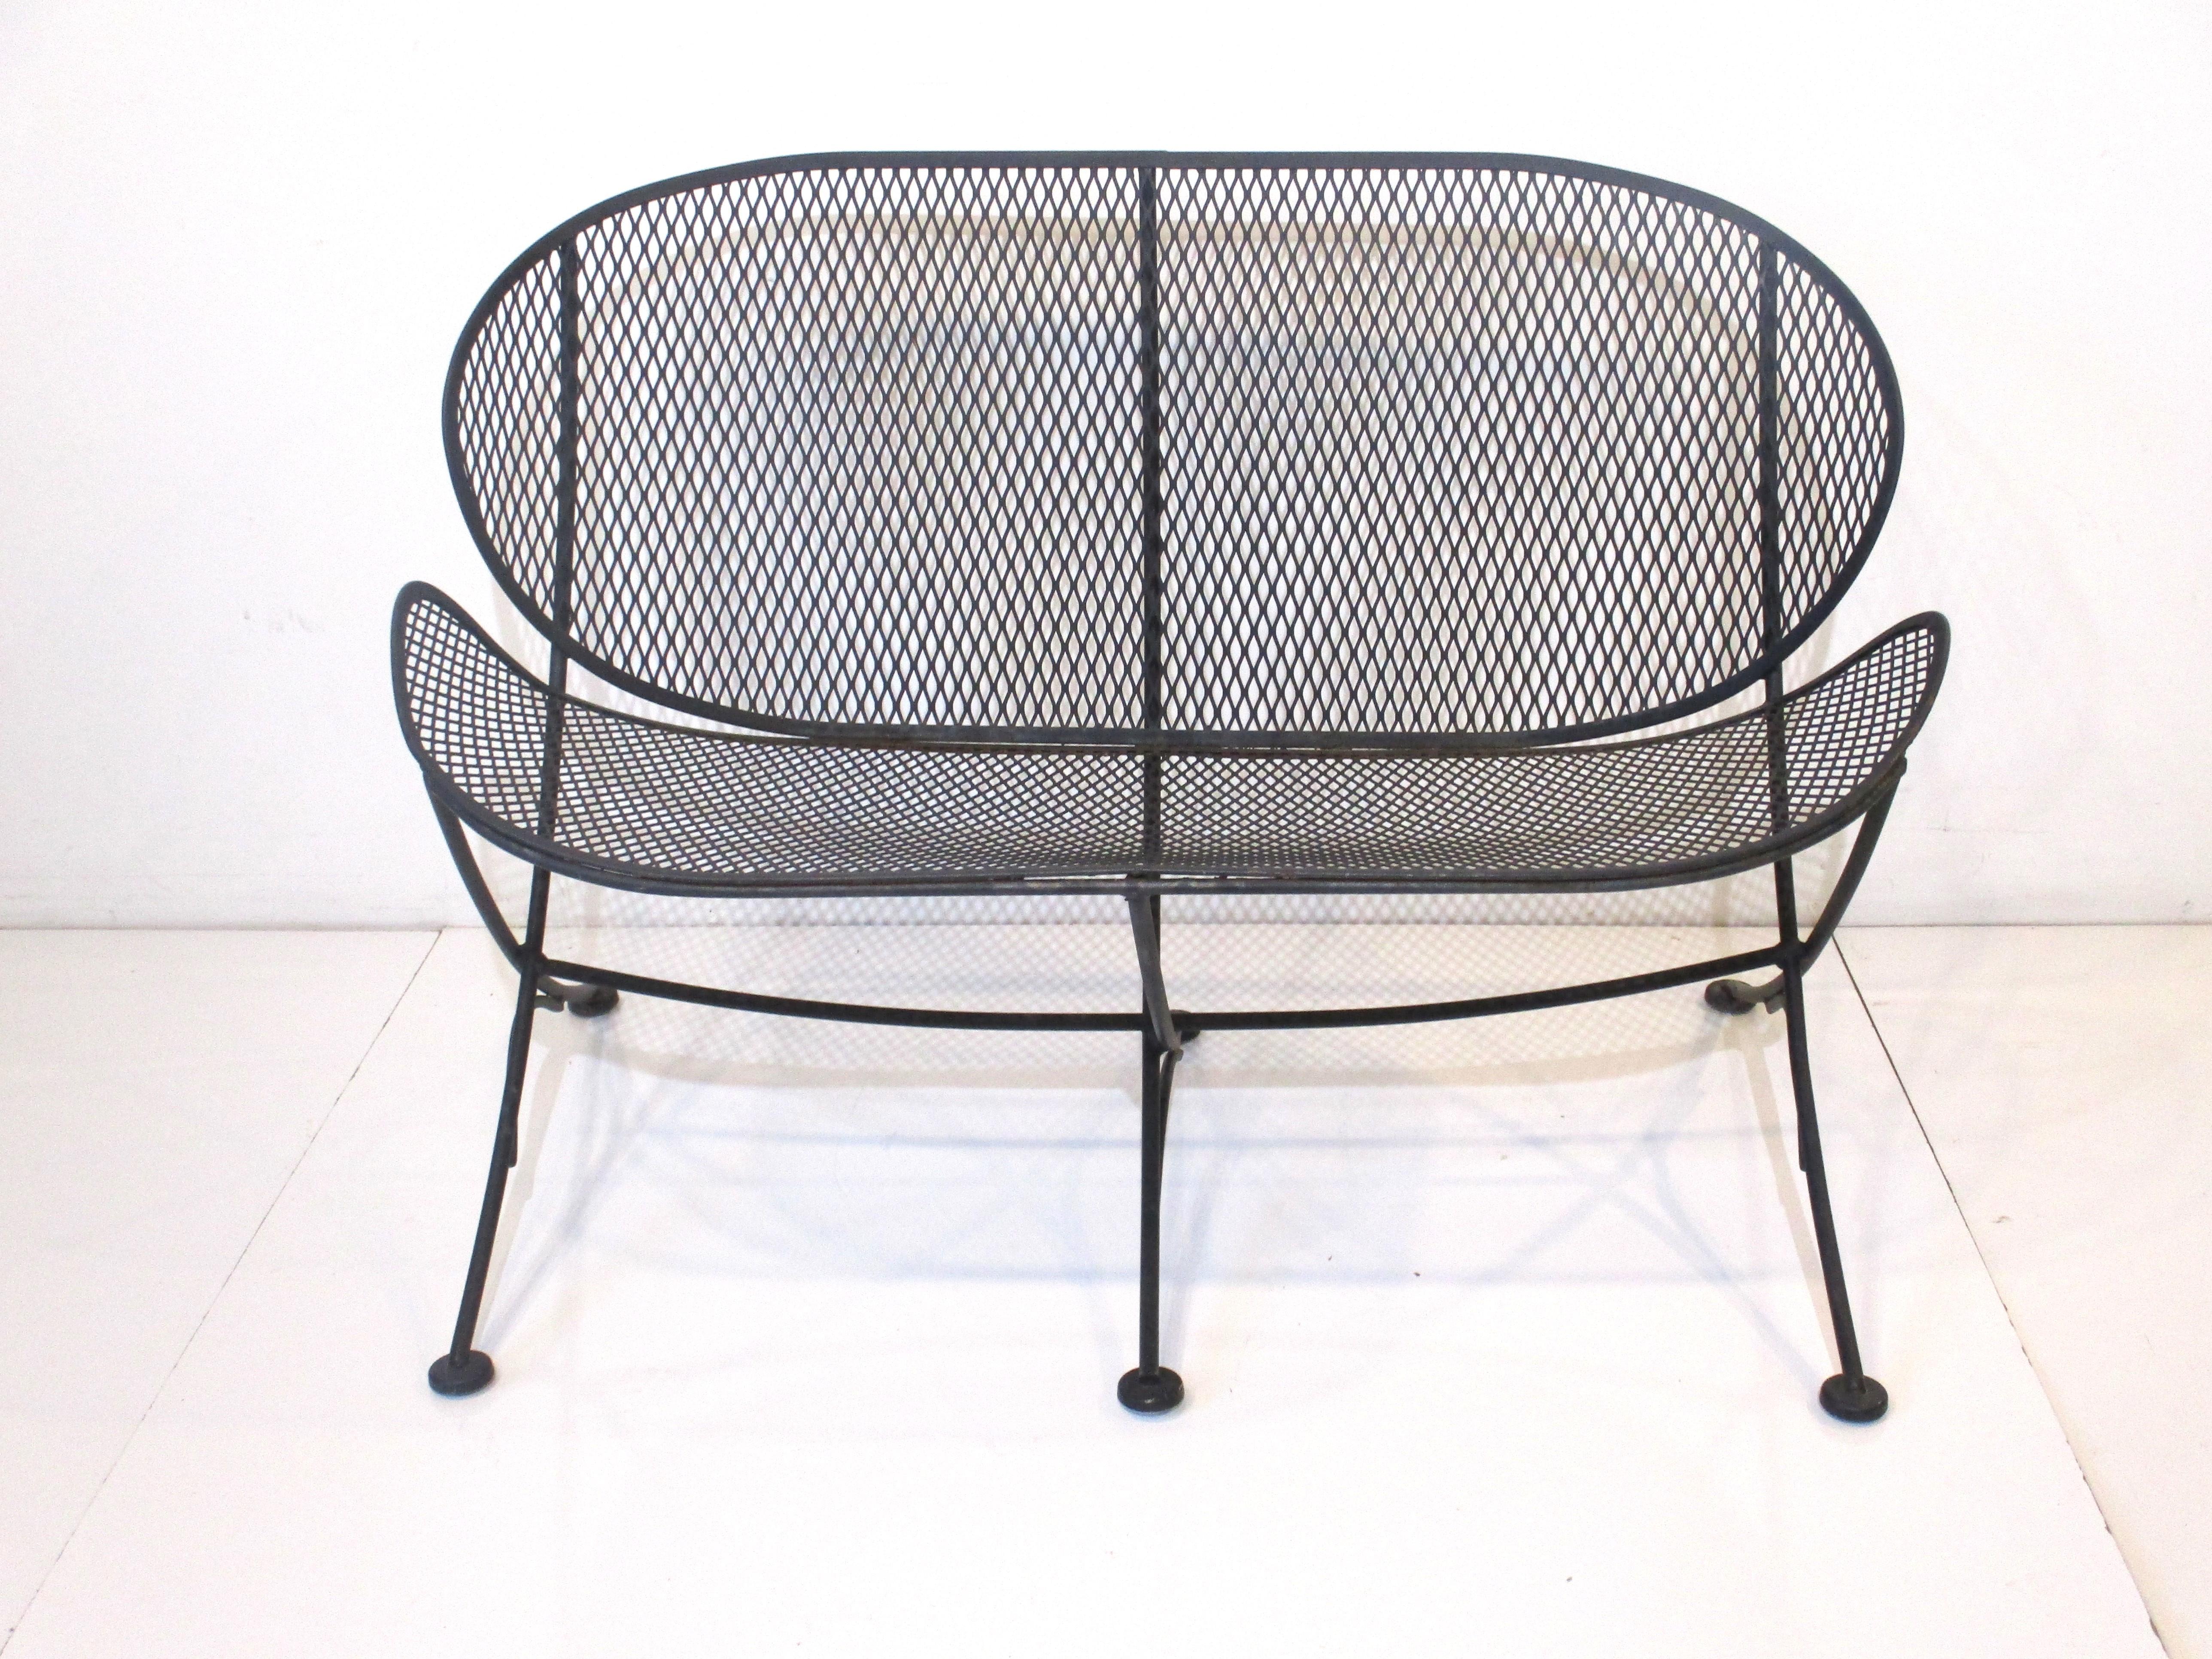 A sculptural iron and mesh orange slice loveseat in a flat black finish with curved legs having foot pads making the piece very stable. A great design for your garden, deck or three seasons room designed by Maurizio Tempestini for John Salterini